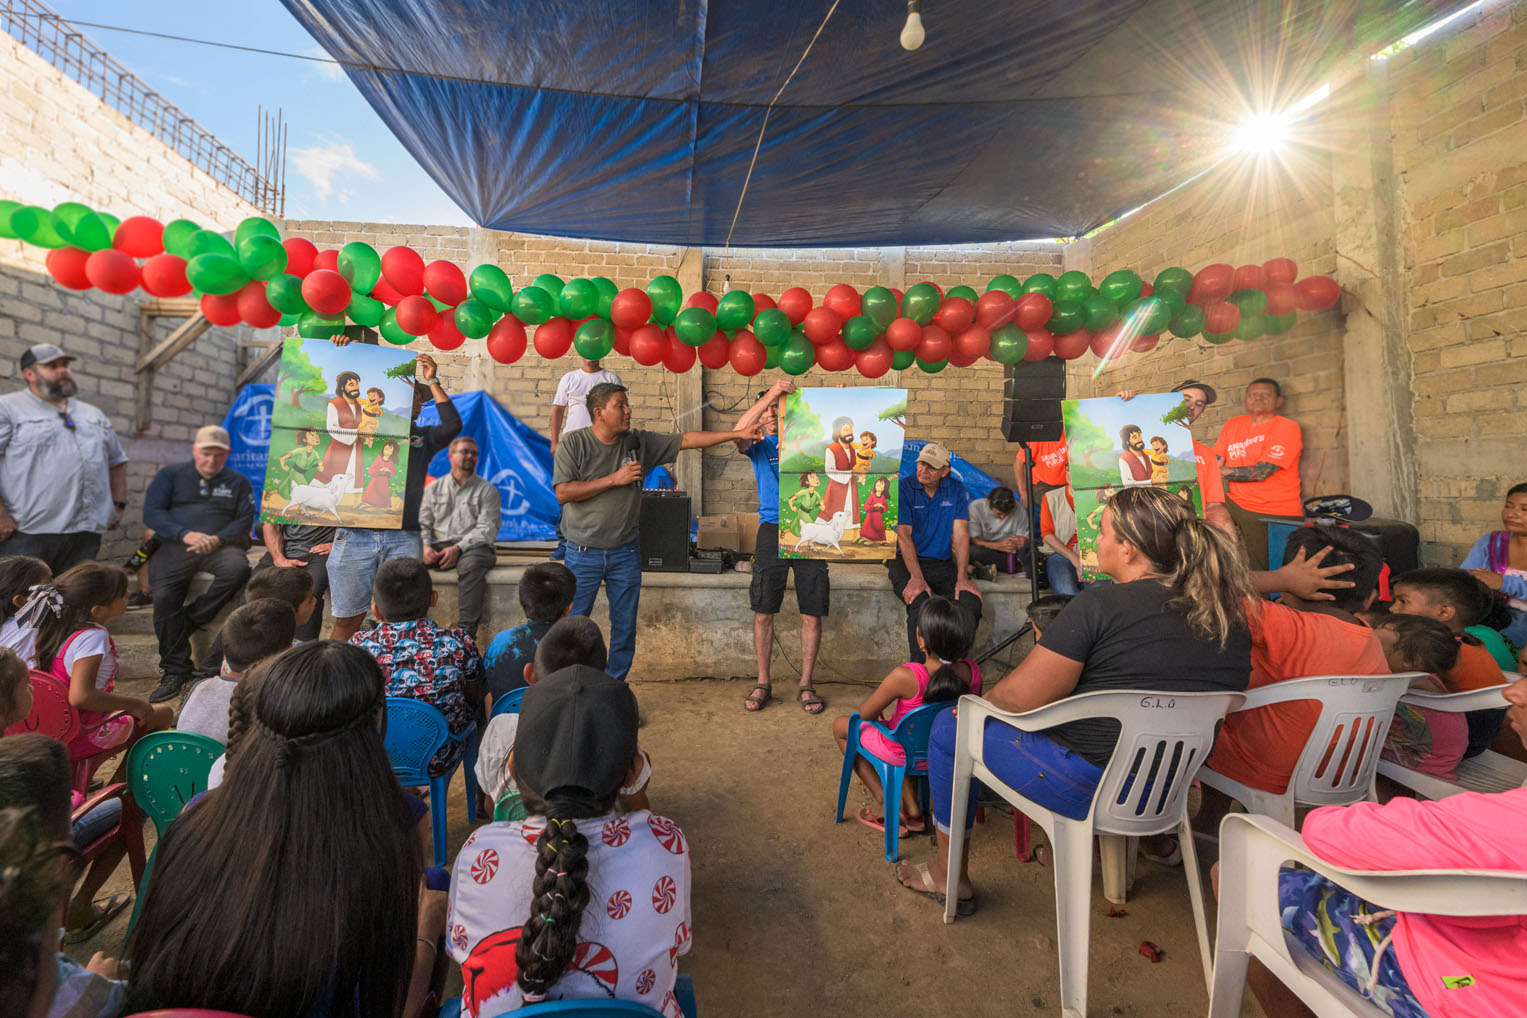 Hundreds of children heard the Good News of Jesus Christ. Thousands of children throughout Guerrero state will hear the Gospel during outreach events in the coming weeks and months.